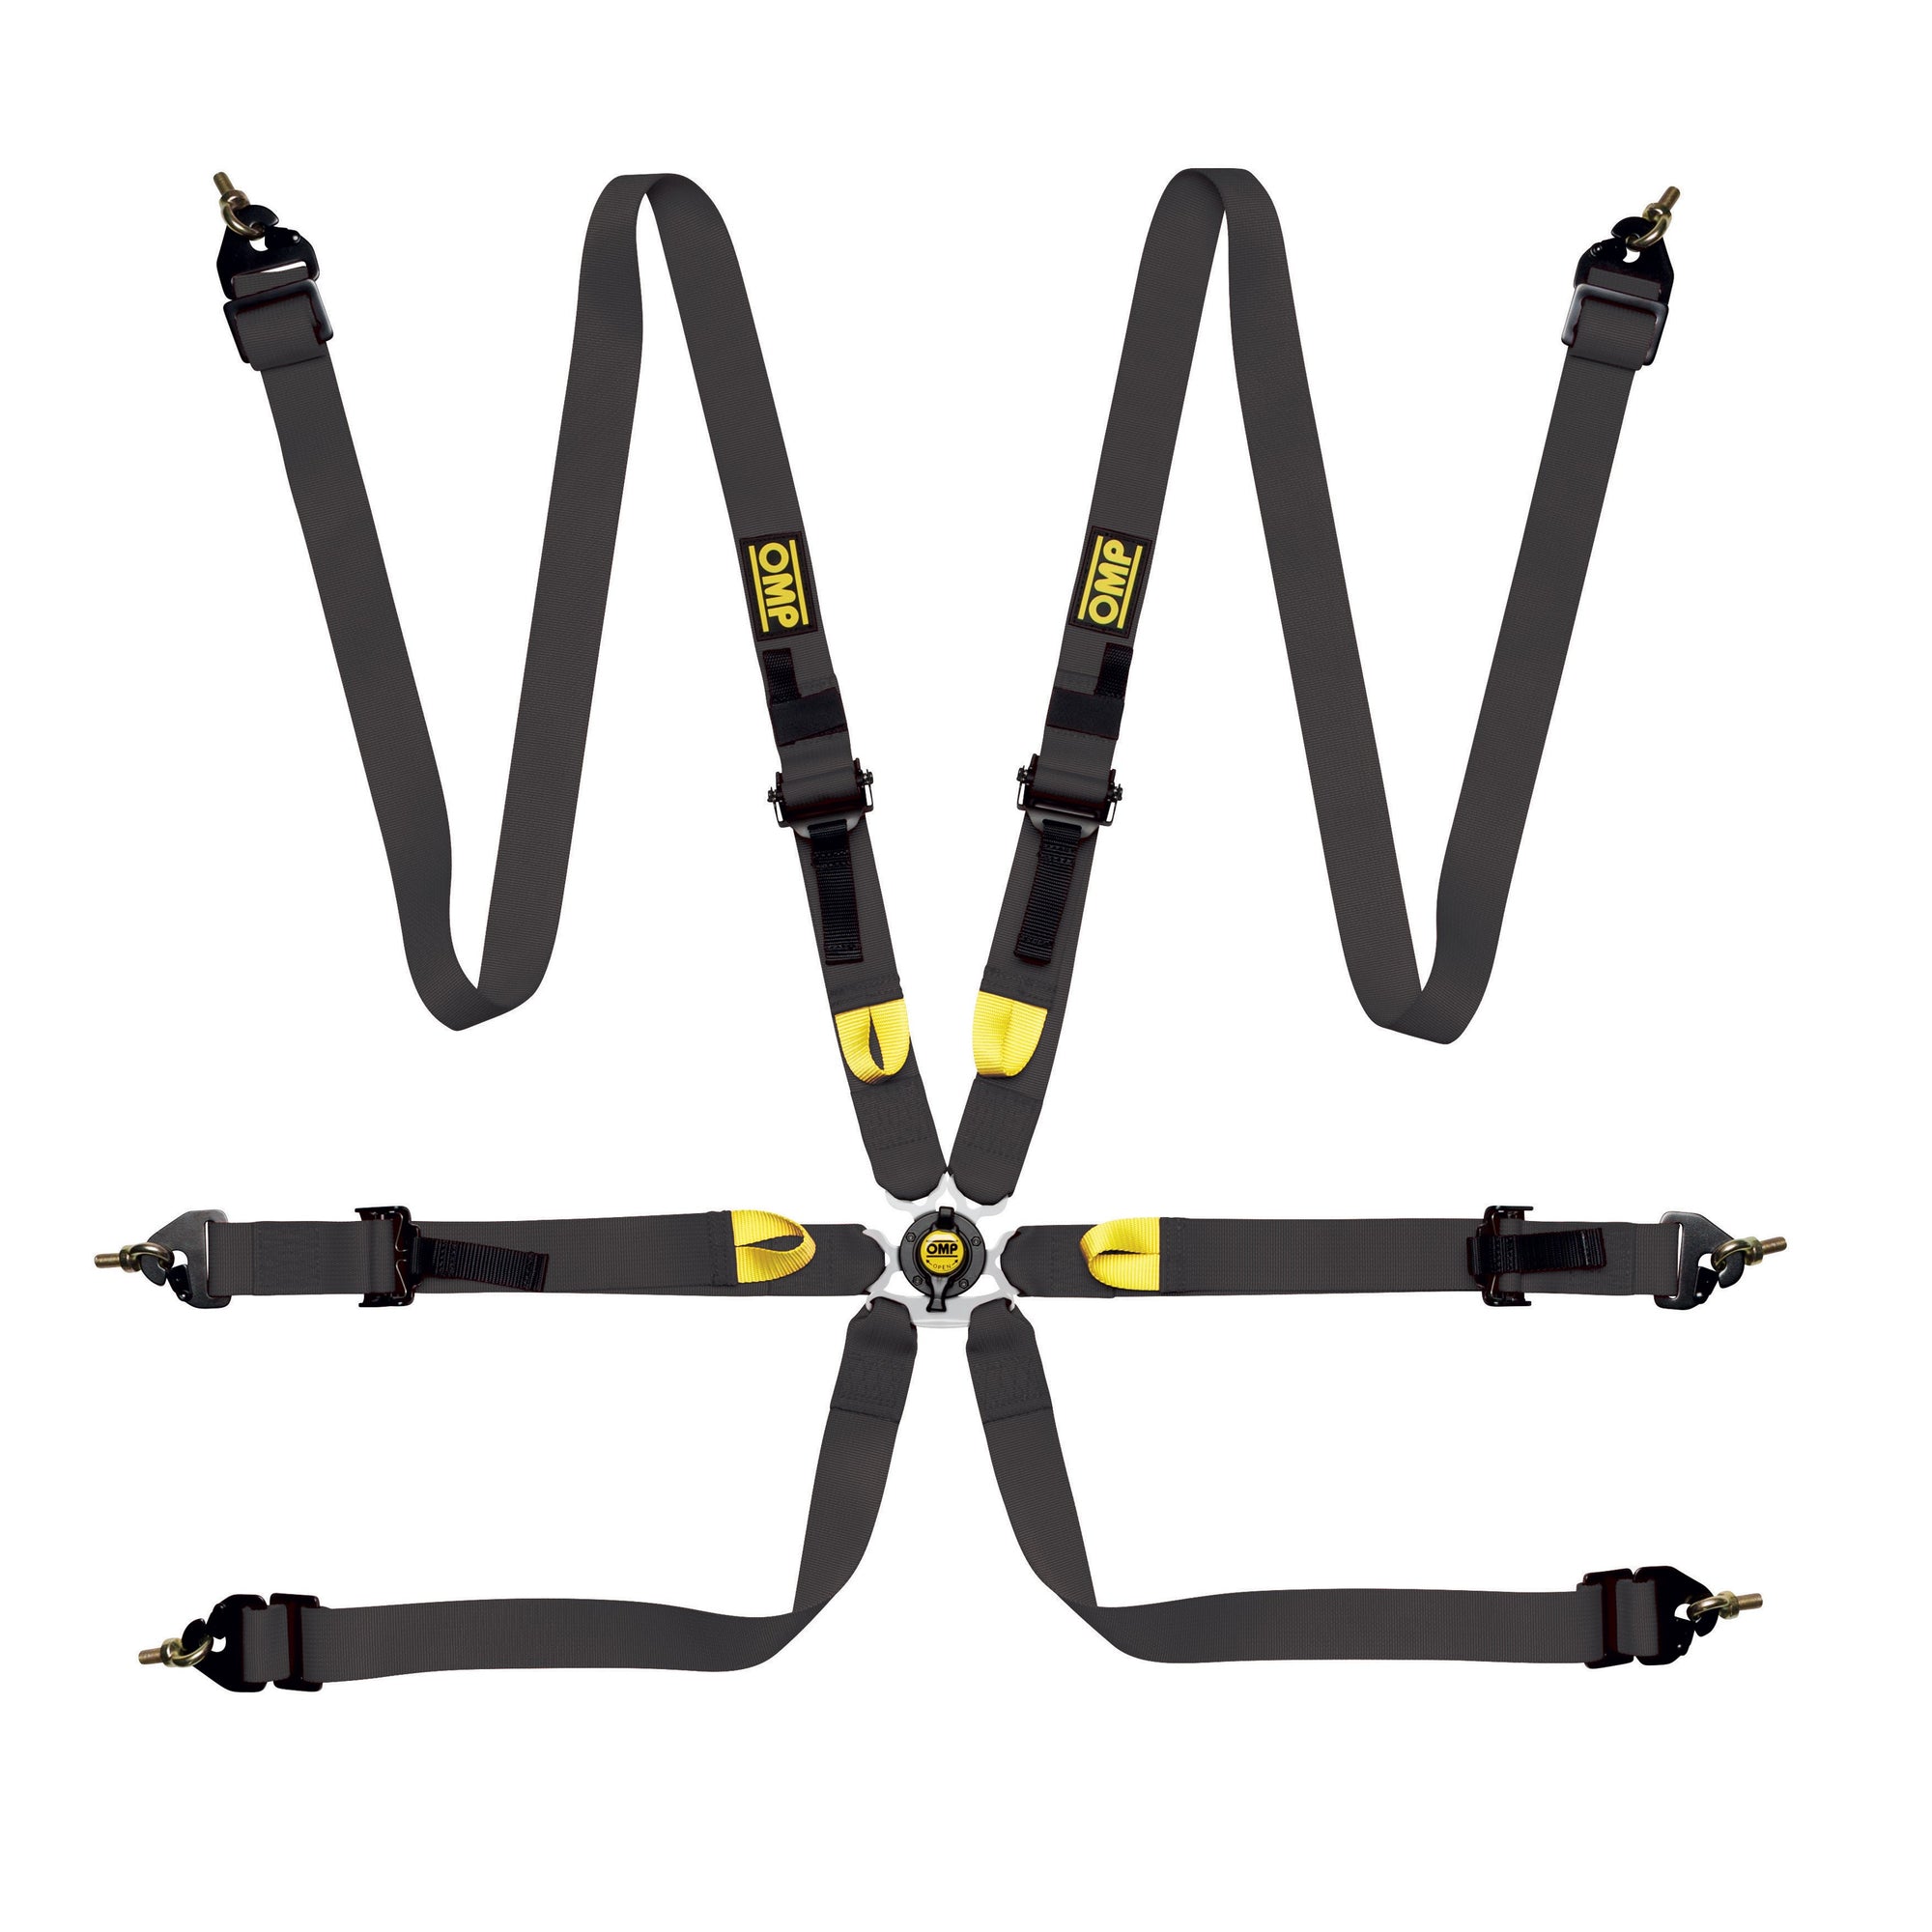 OMP First 2 Harness - Saferacer